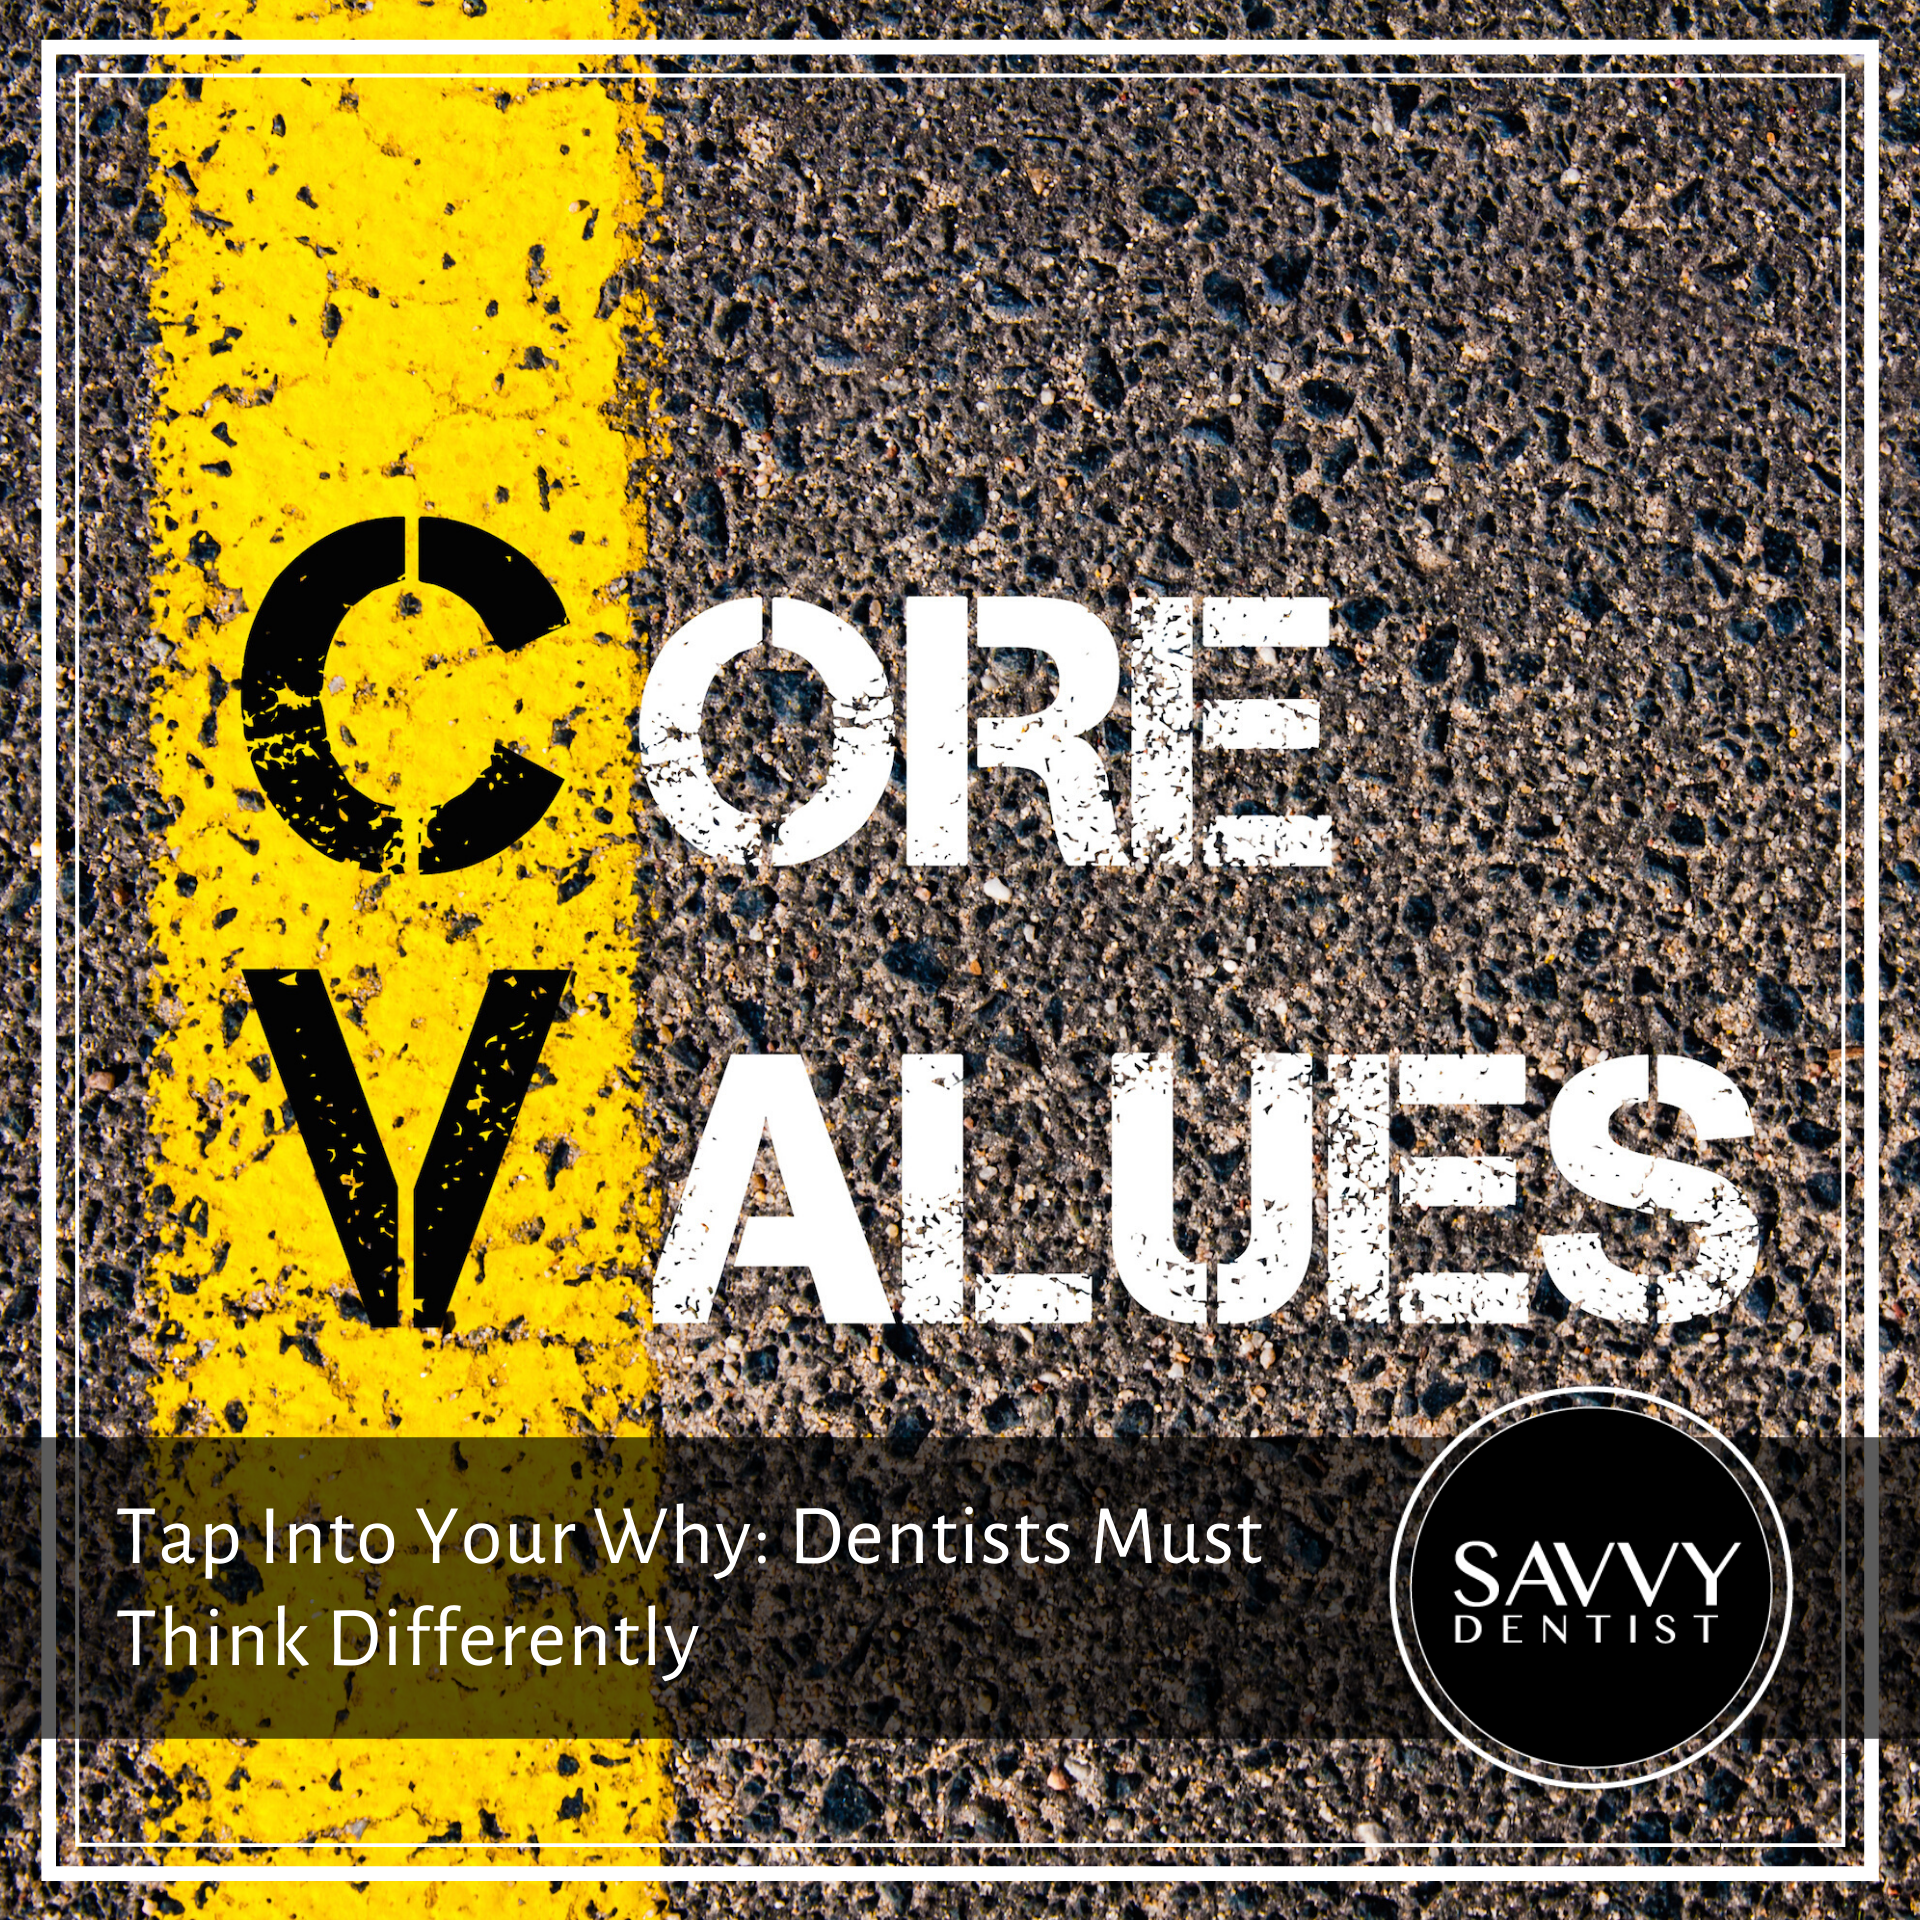 Tap into your why: Dentists must think differently